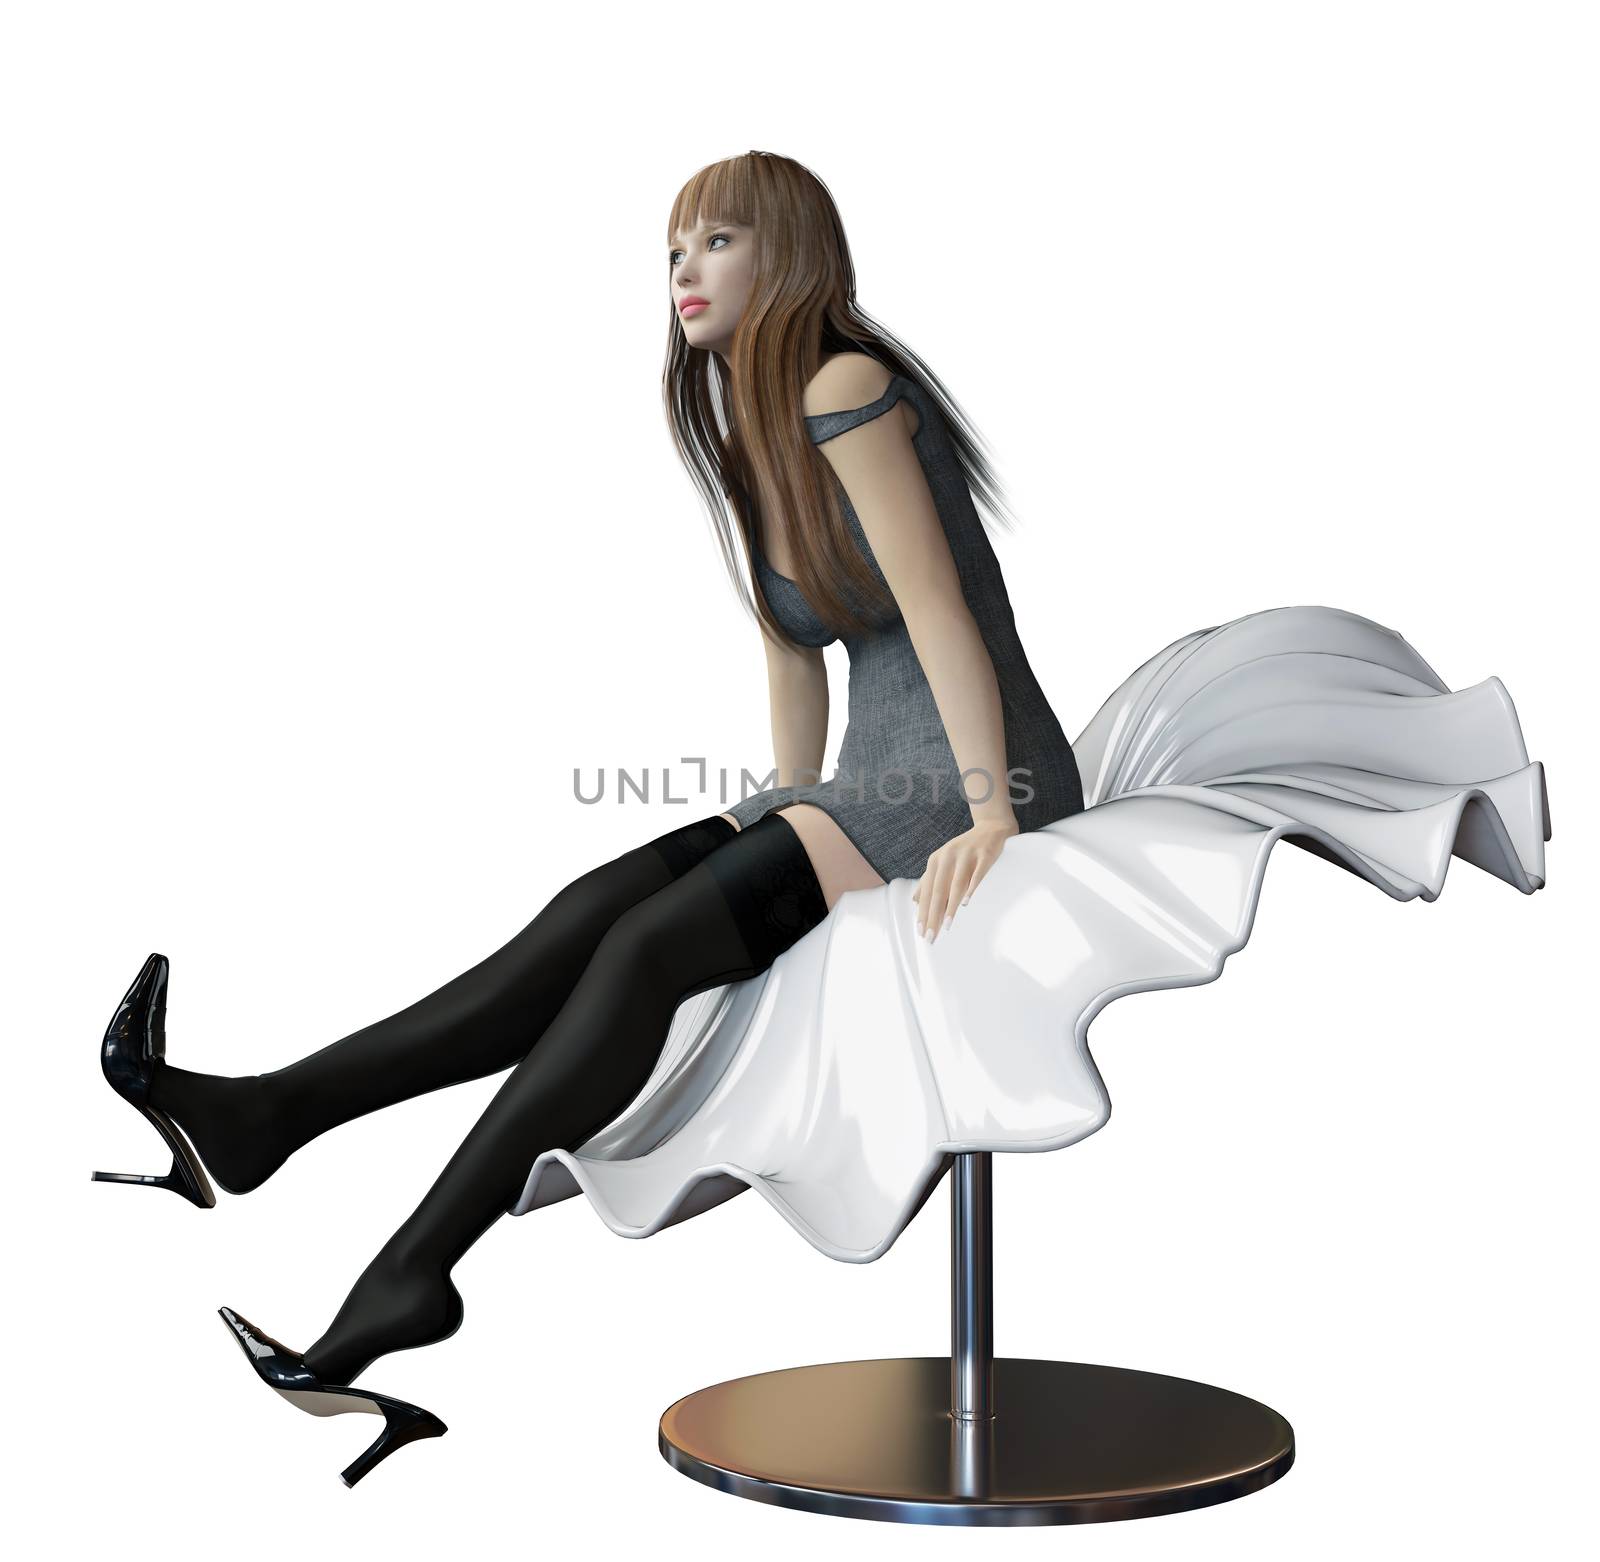 Sexy woman sitting in a futuristic bench by Morphart